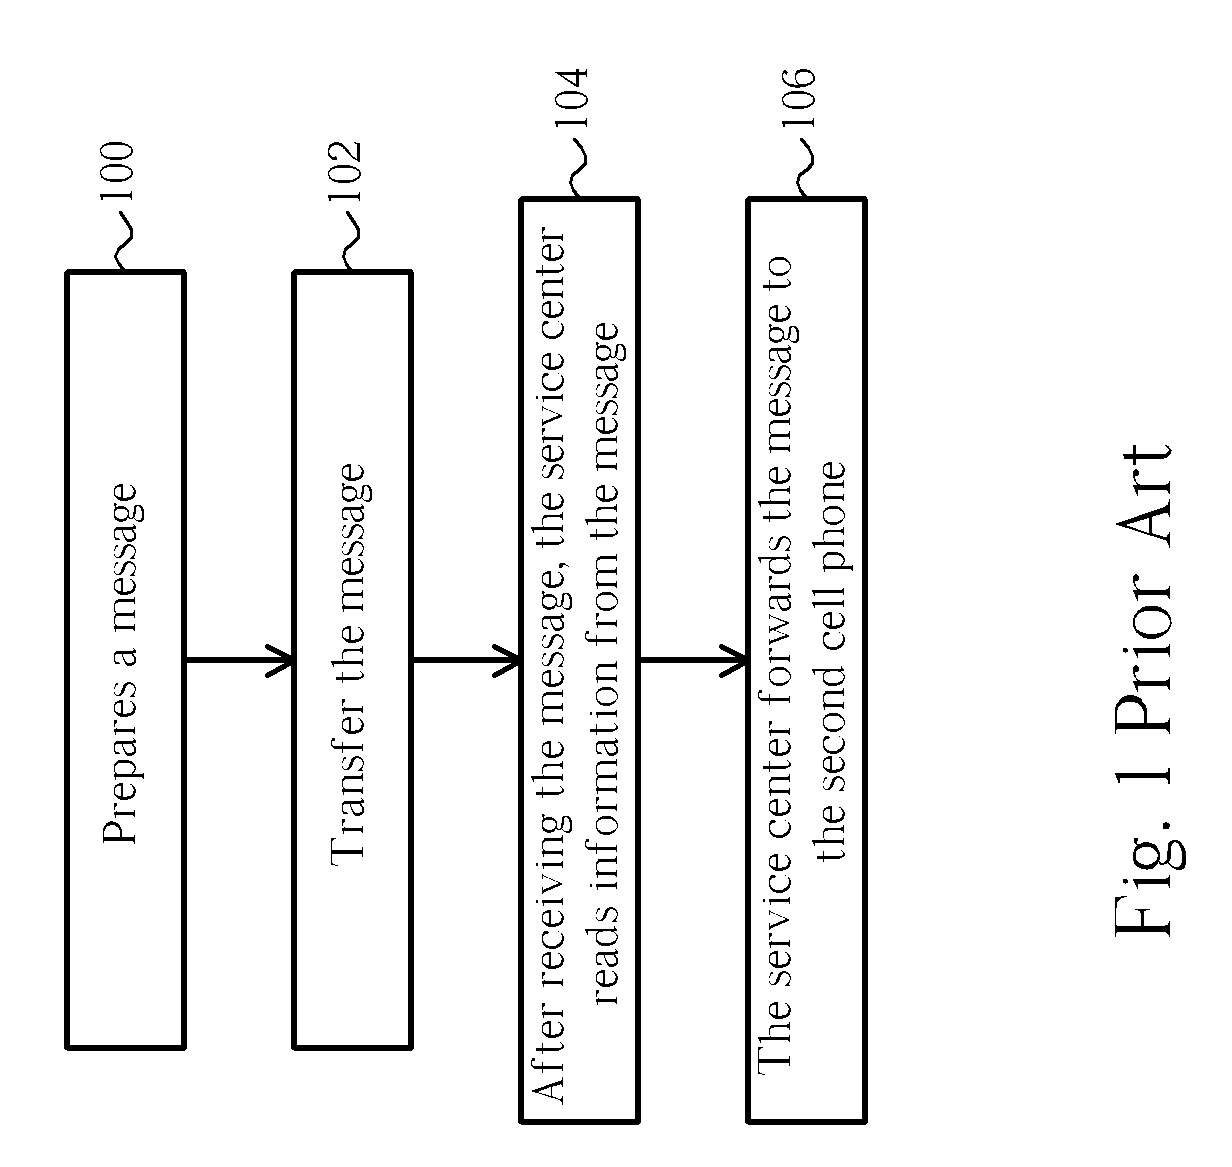 Method for transferring a message in a predetermined sending time and related communication system thereof